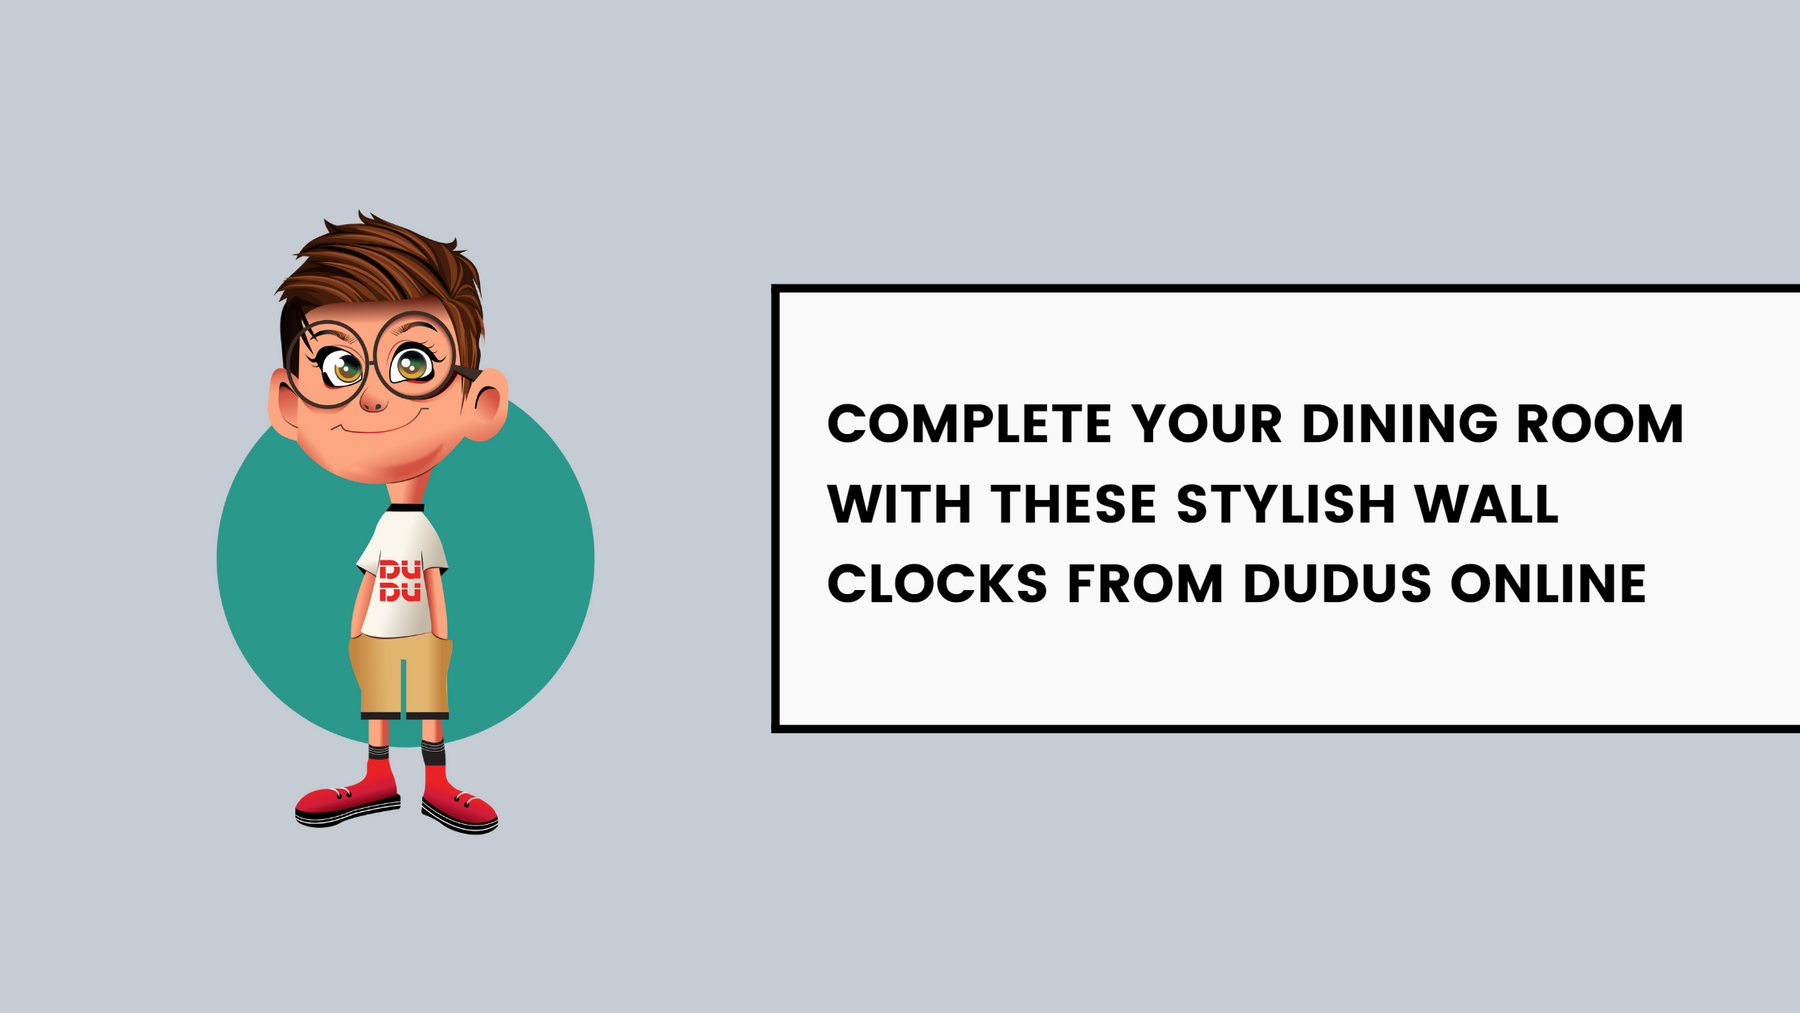 Complete Your Dining Room With These Stylish Wall Clocks From Dudus Online